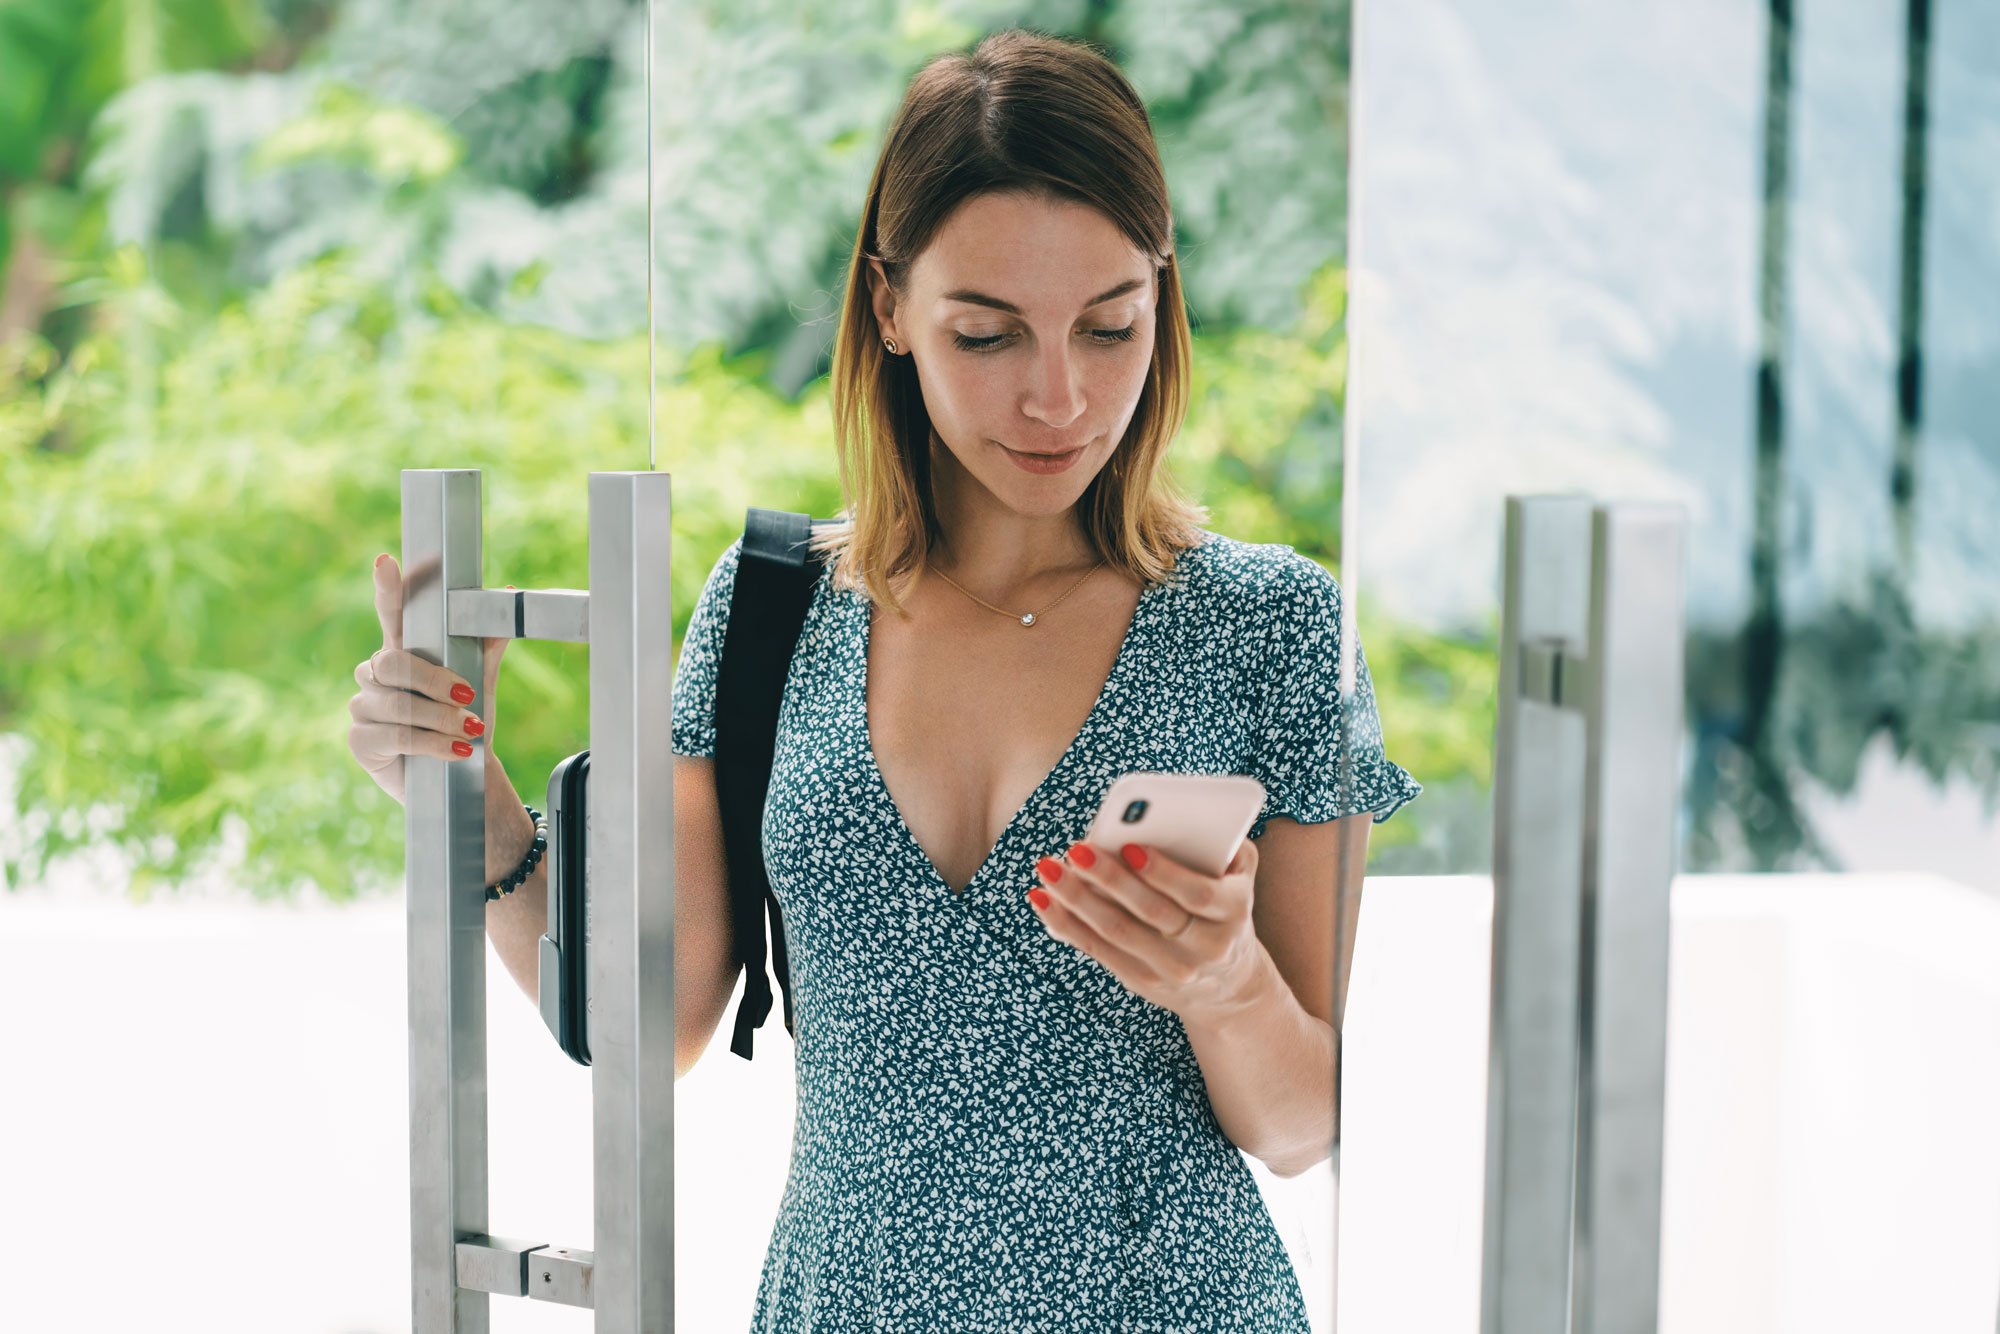 Young woman checking her smartphone while entering a building